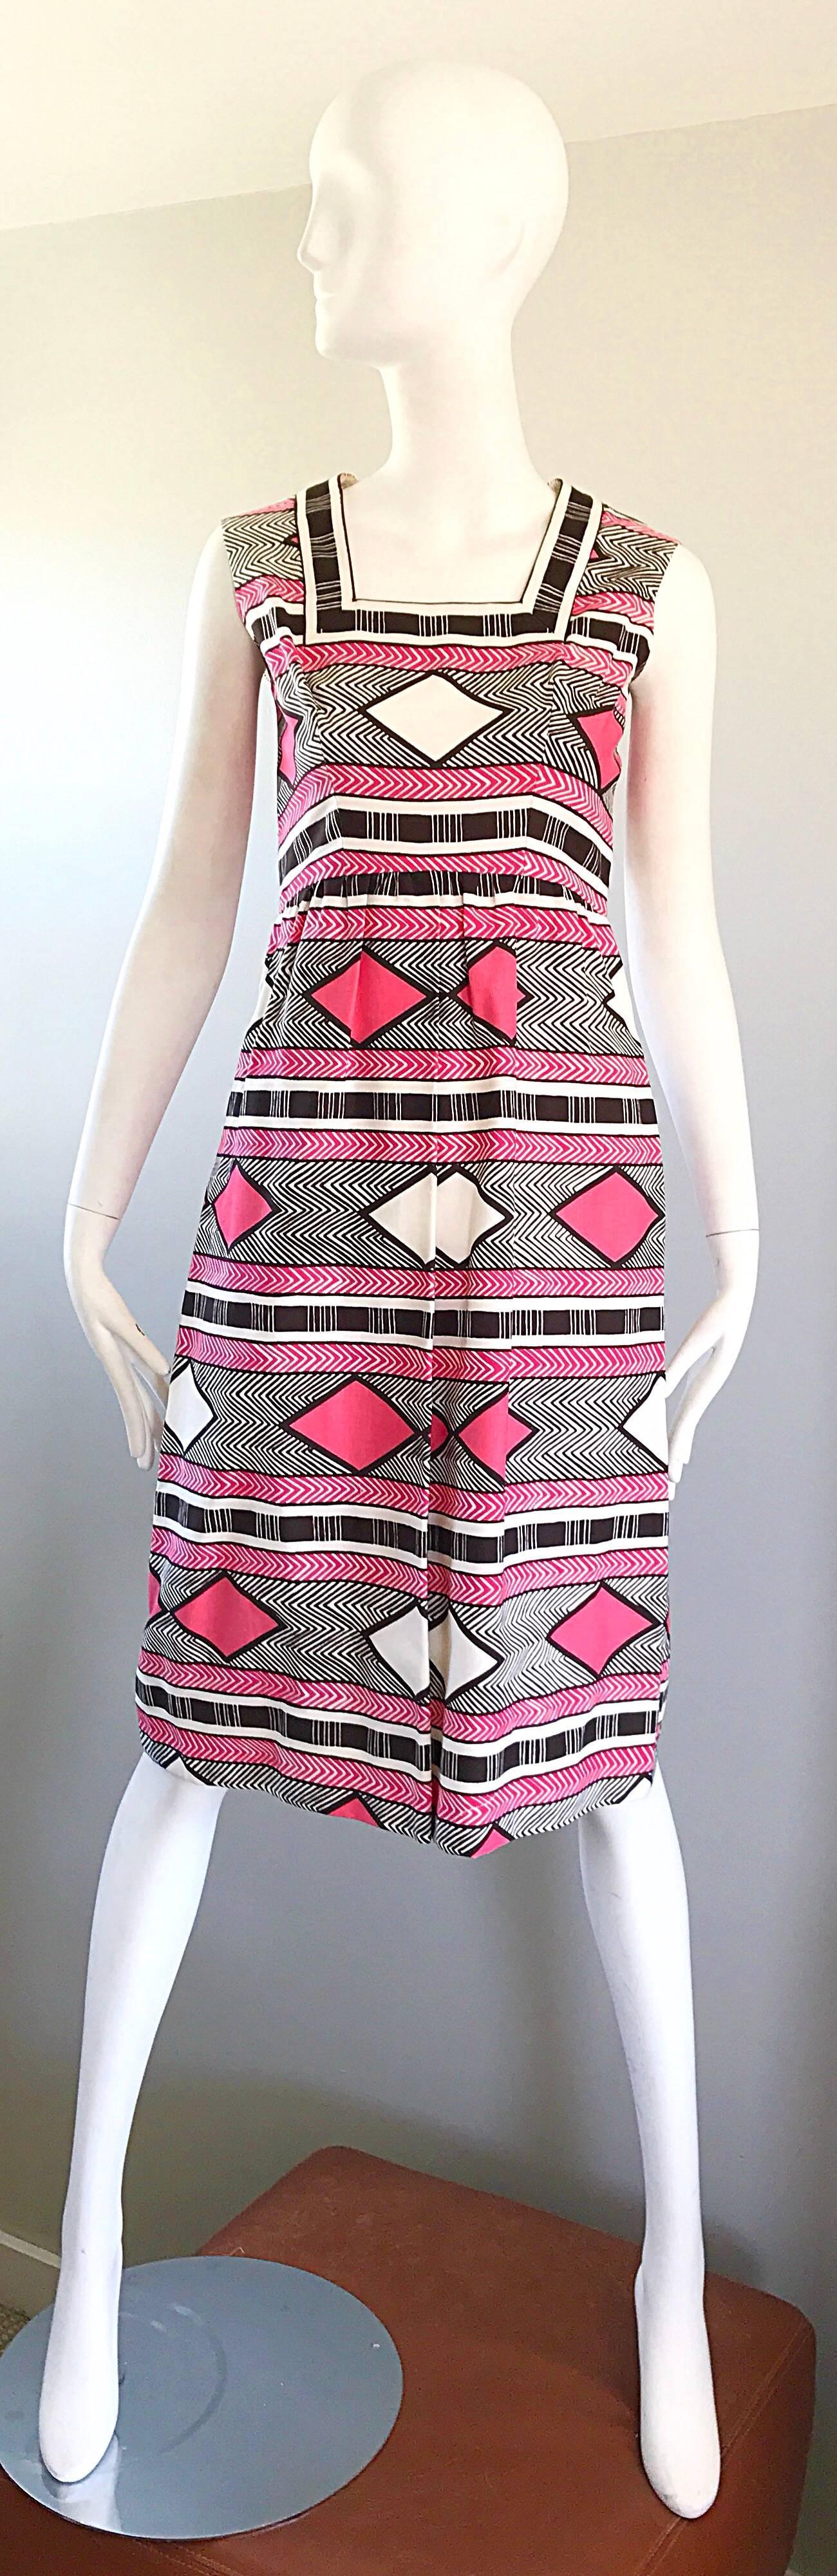 Chic and charming vintage 1960s MALCOLM STARR sleeveless A-line dress, with matching cropped bolero jacket! Sturdy, but soft cotton holds shape nicely. Features vibrant shades of pink, brown and white in eye catching geometric three dimensional